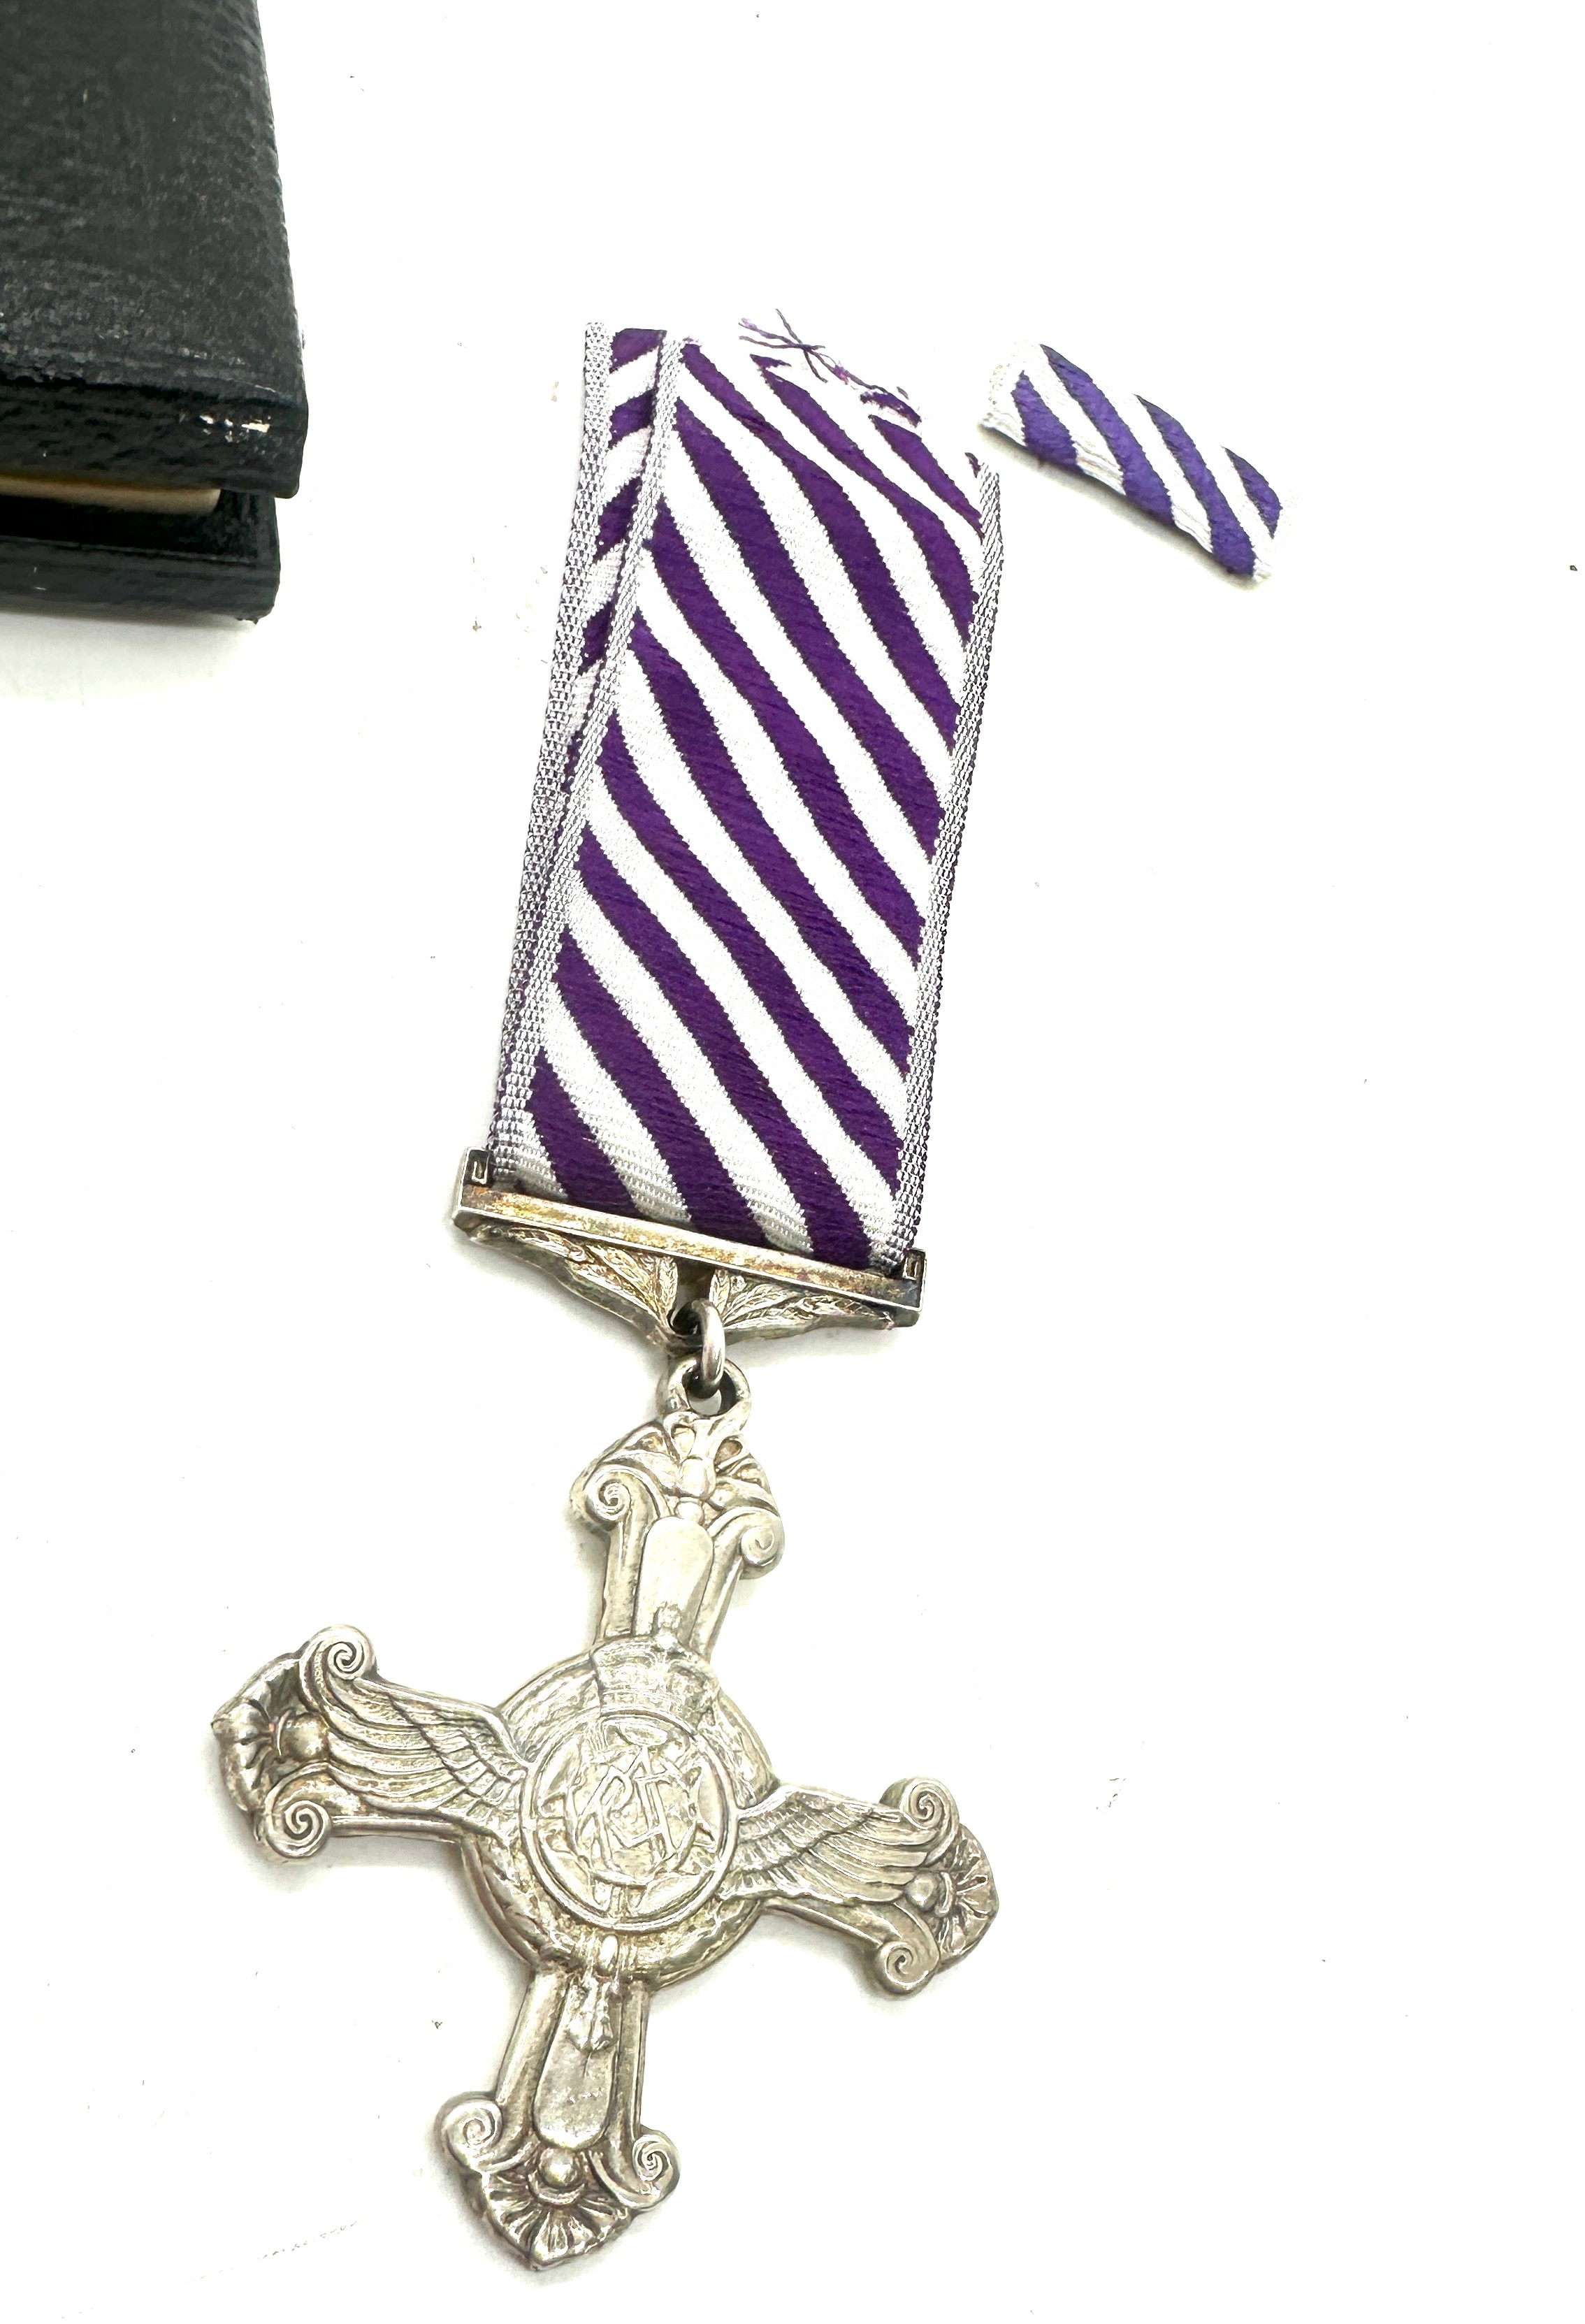 Replica of a 1918 Silver flying cross medal in original box - Image 2 of 4